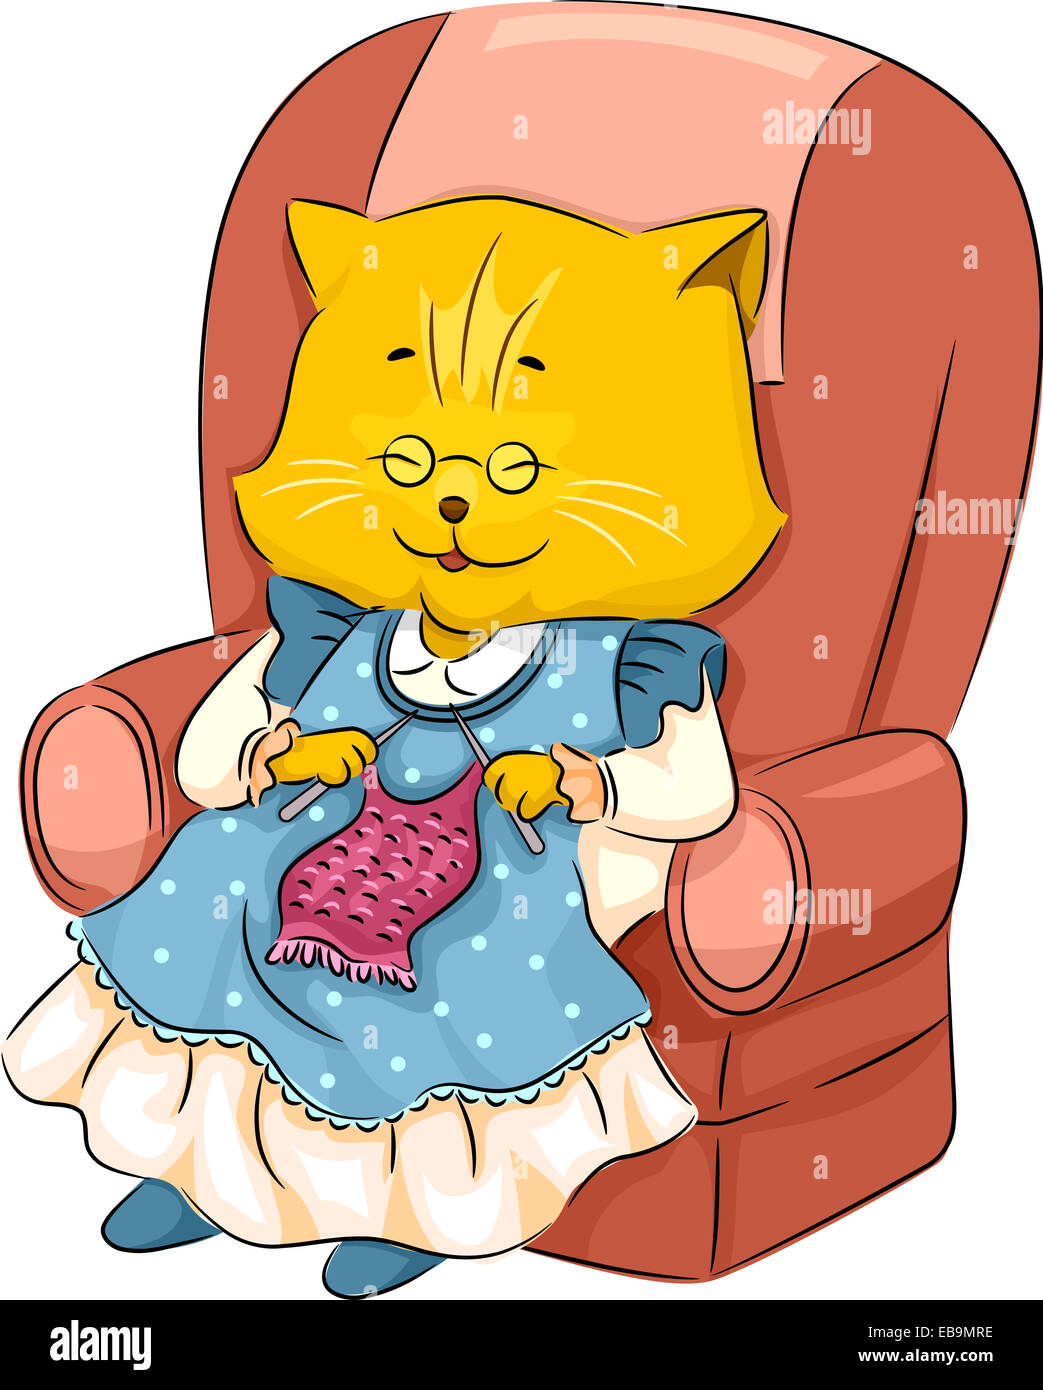 Illustration Featuring a Granny Cat Knitting Stock Photo